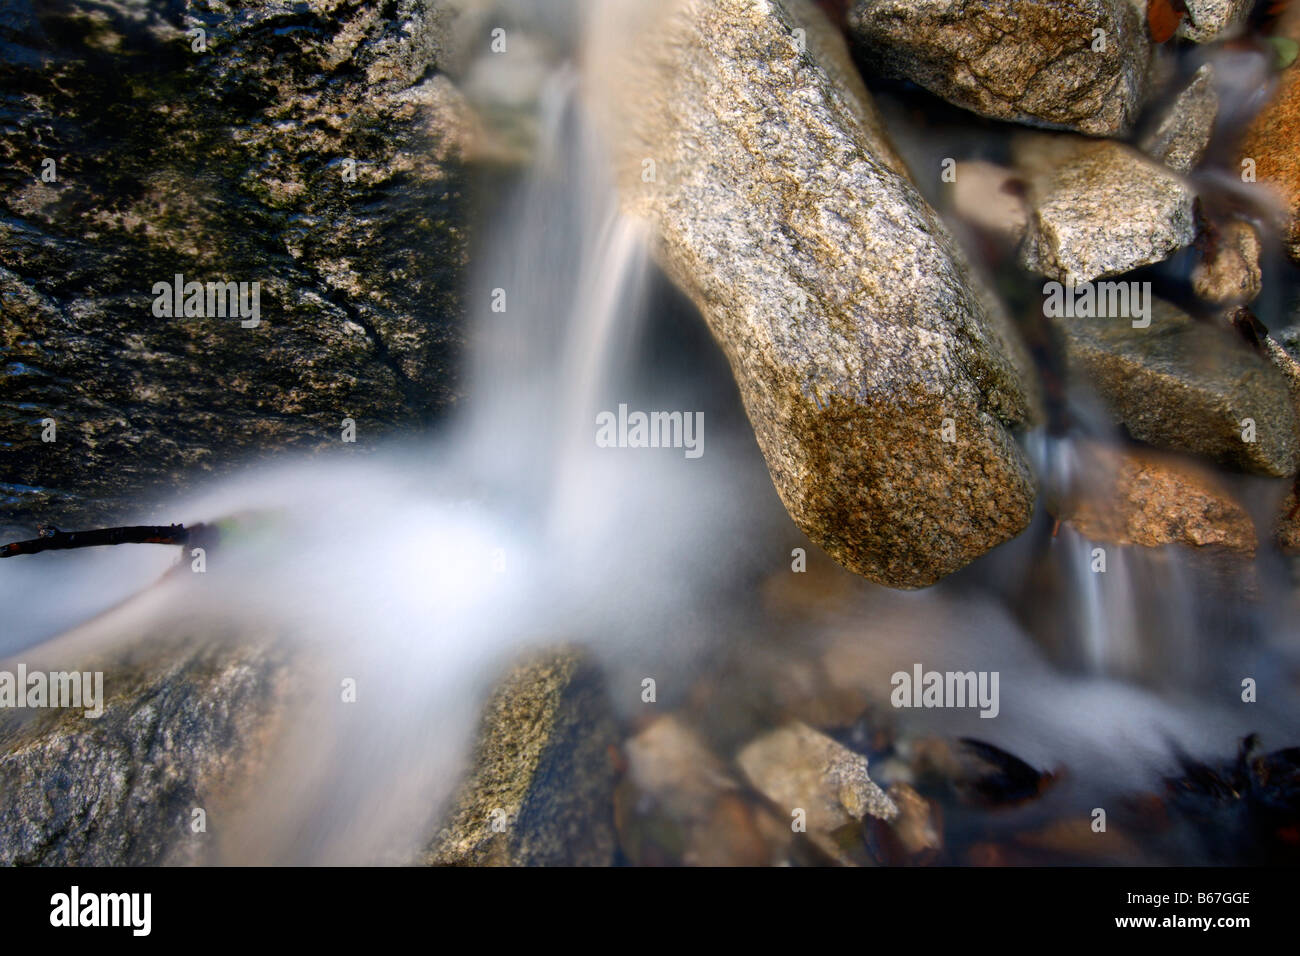 A long exposure of a small stream. Royalty free image. Stock Photo